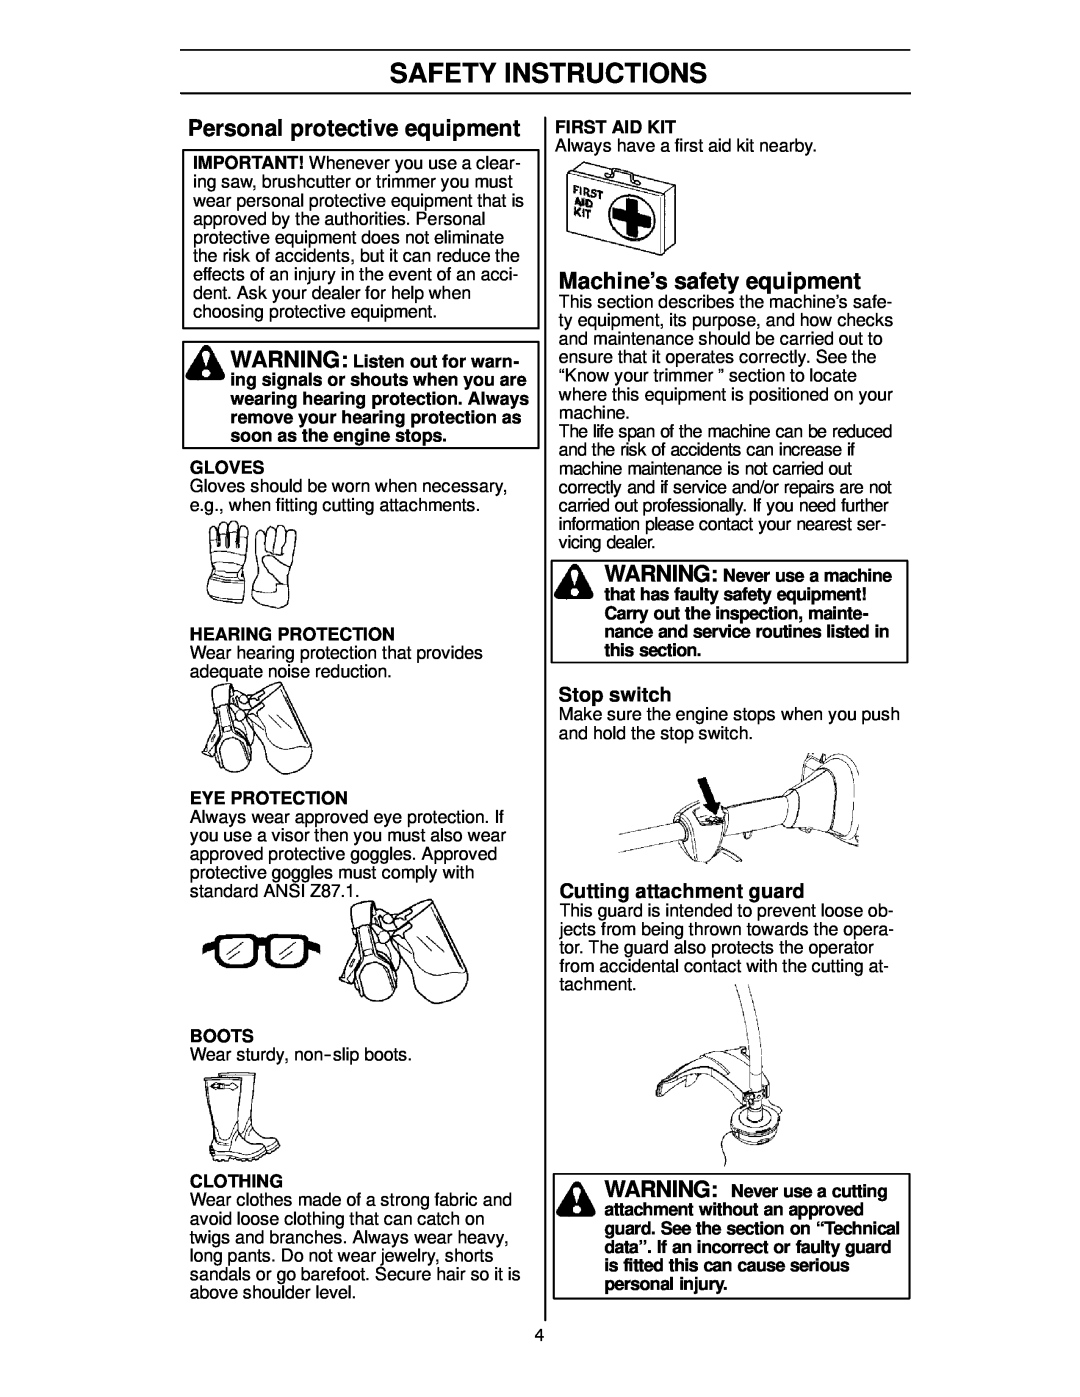 Husqvarna 124C Safety Instructions, Personal protective equipment, Machine’s safety equipment, Stop switch, Gloves, Boots 